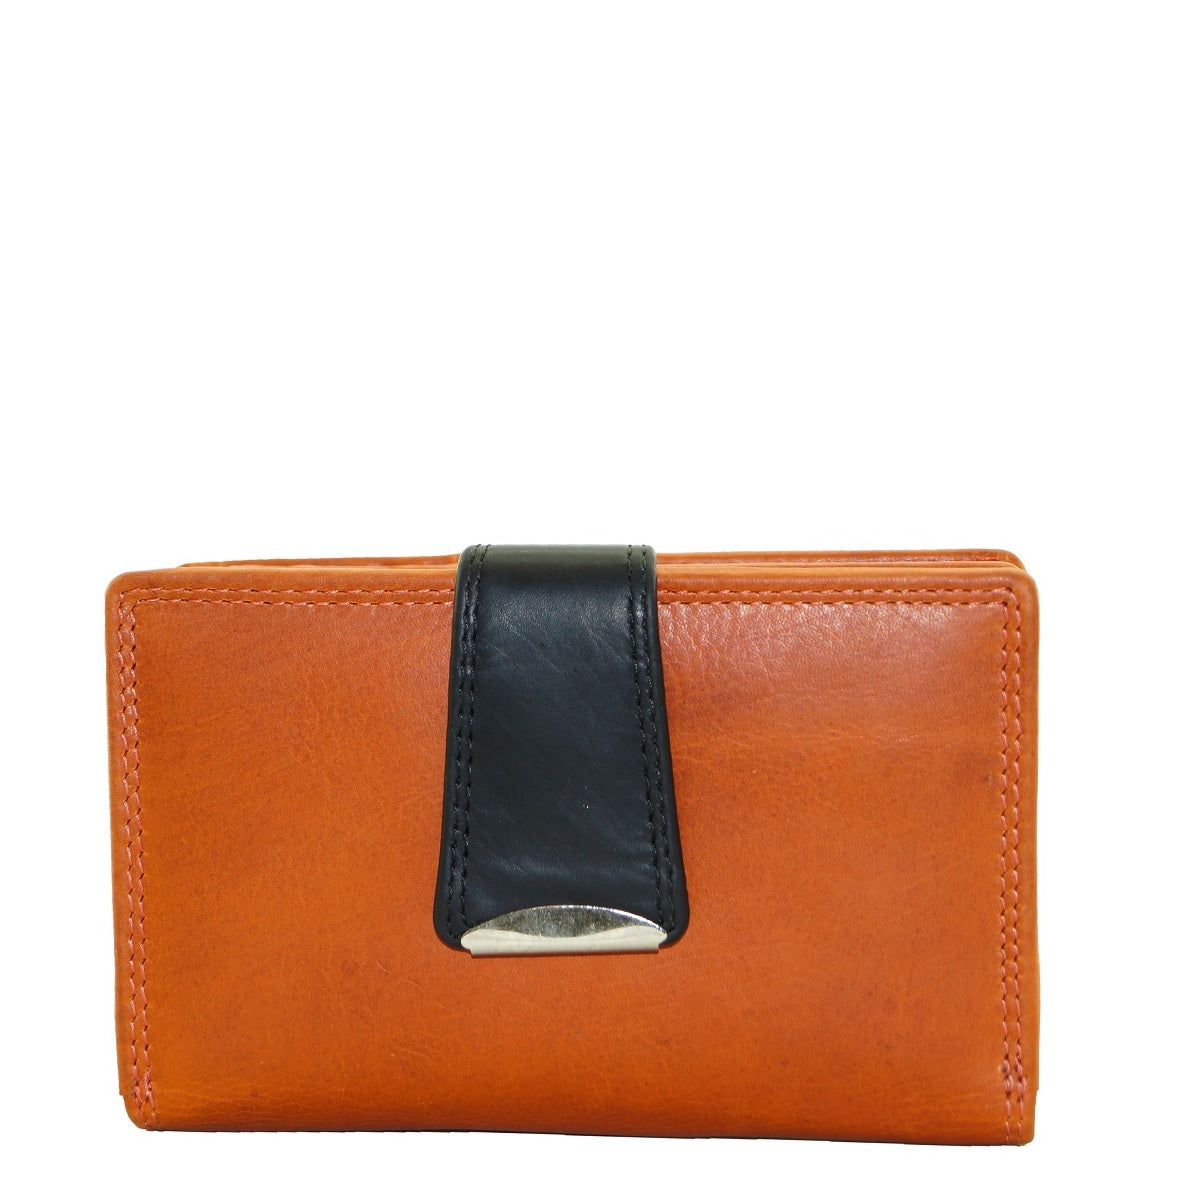 Women's Leather Oil Pull Up Wallet ZOPX9739